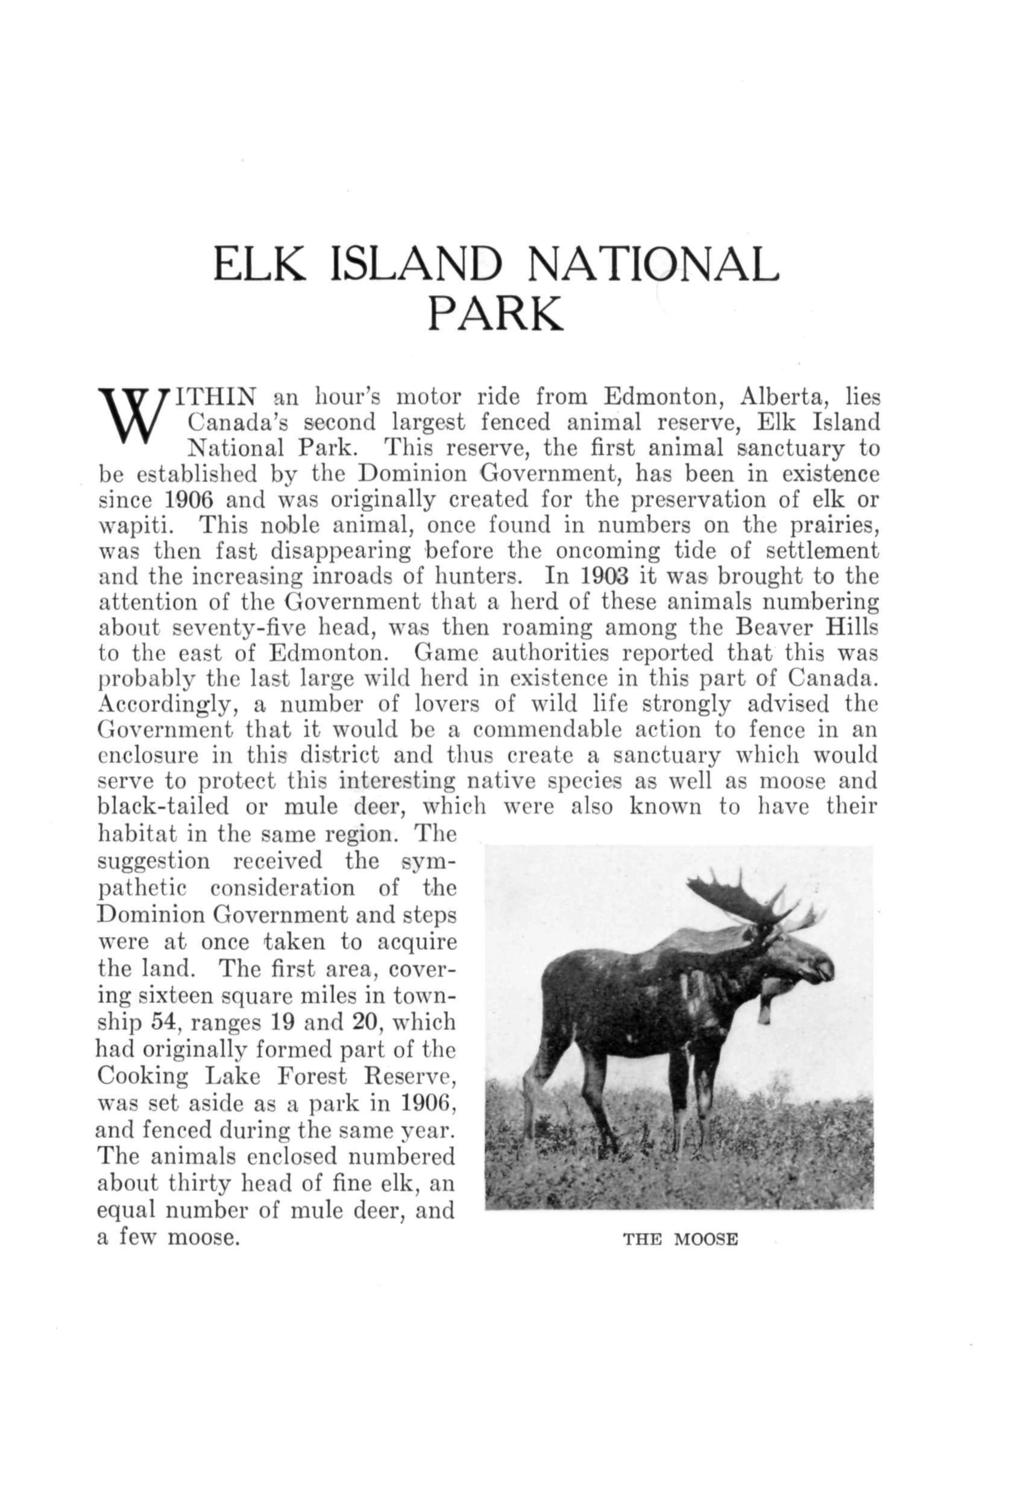 ELK ISLAND NATIONAL PARK WITHIN an hour's motor ride from Edmonton, Alberta, lies Canada's second largest fenced animal reserve, Elk Island National Park.